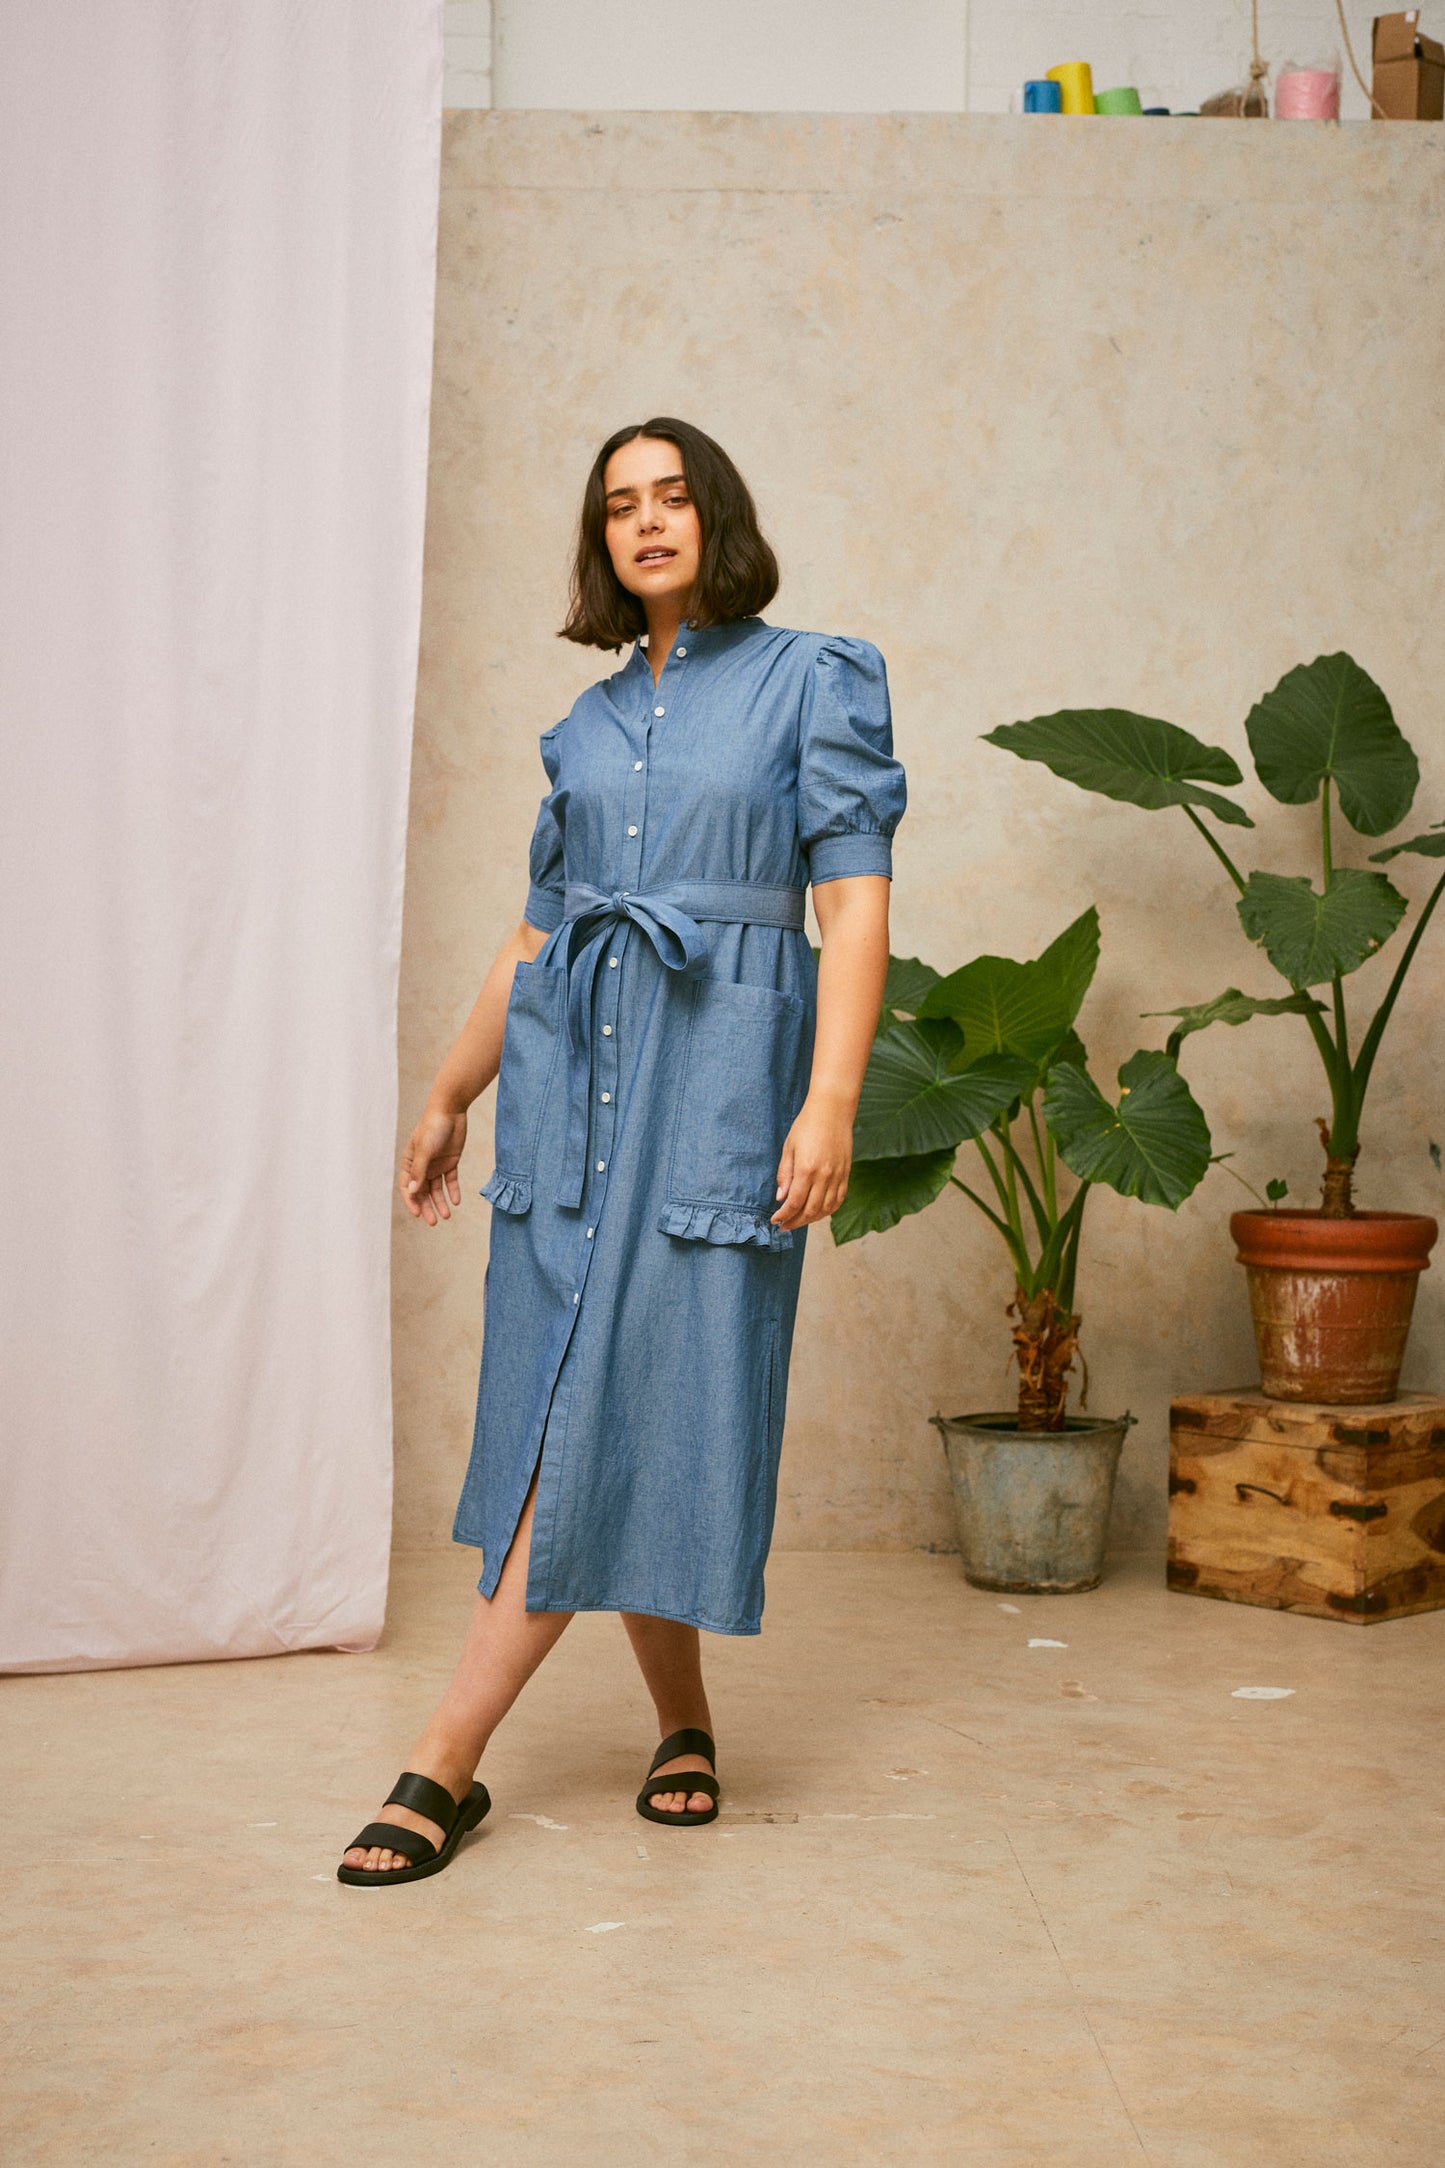 Full length shot of model wearing Saywood's Rosa denim shirtdress in light wash Japanese denim; a long line style with patch pockets and ruffles, a belt tied round the waist. Worn with black sandals. A plant and drop of pink fabric can be seen in the background.